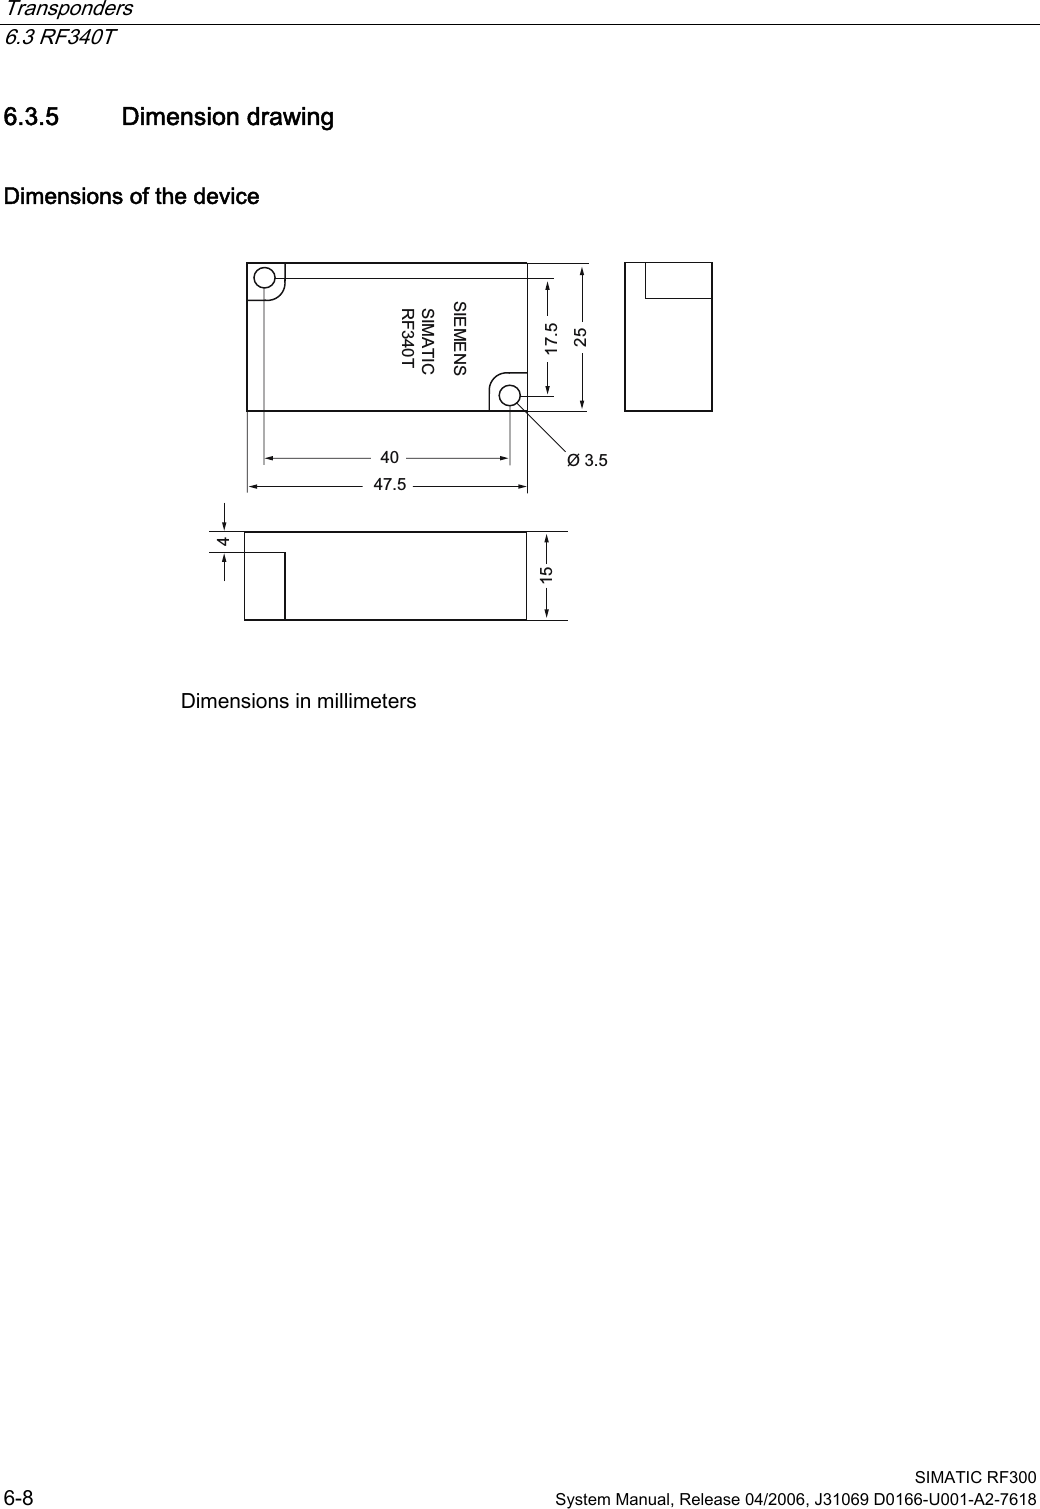 Transponders   6.3 RF340T  SIMATIC RF300 6-8  System Manual, Release 04/2006, J31069 D0166-U001-A2-7618 6.3.5  Dimension drawing Dimensions of the device 6,(0(166,0$7,&amp;5)7  Dimensions in millimeters 